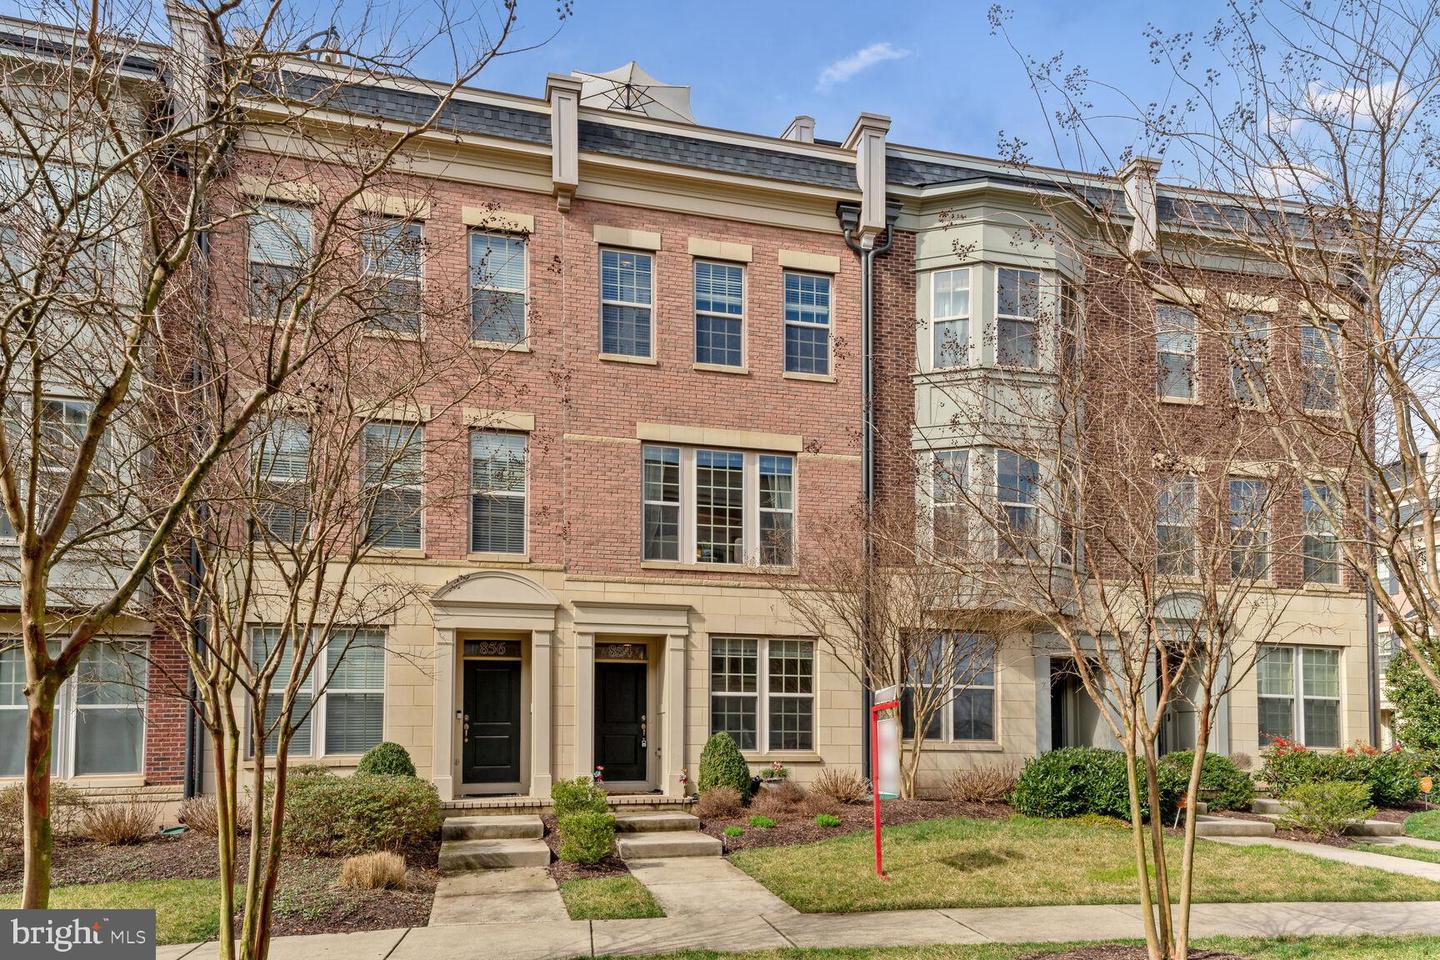 View Oxon Hill, MD 20745 townhome